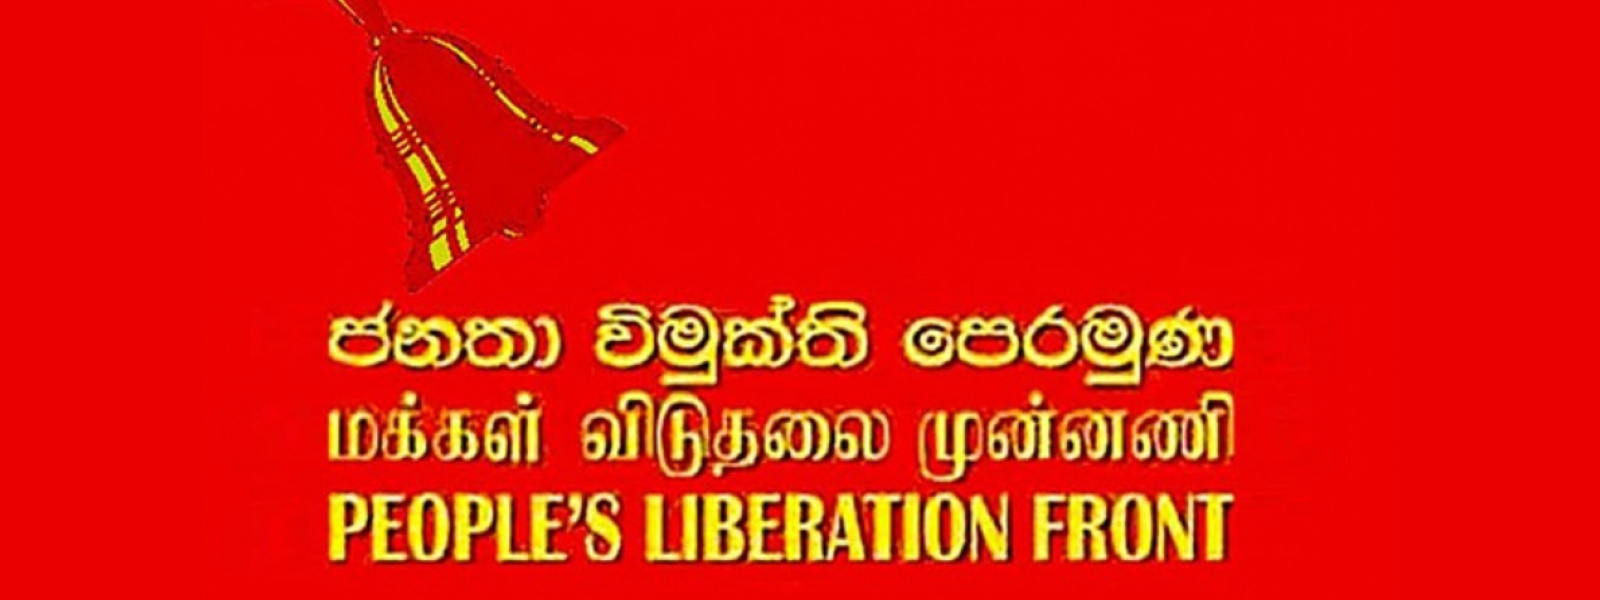 JVP celebrates May day at BRC Grounds